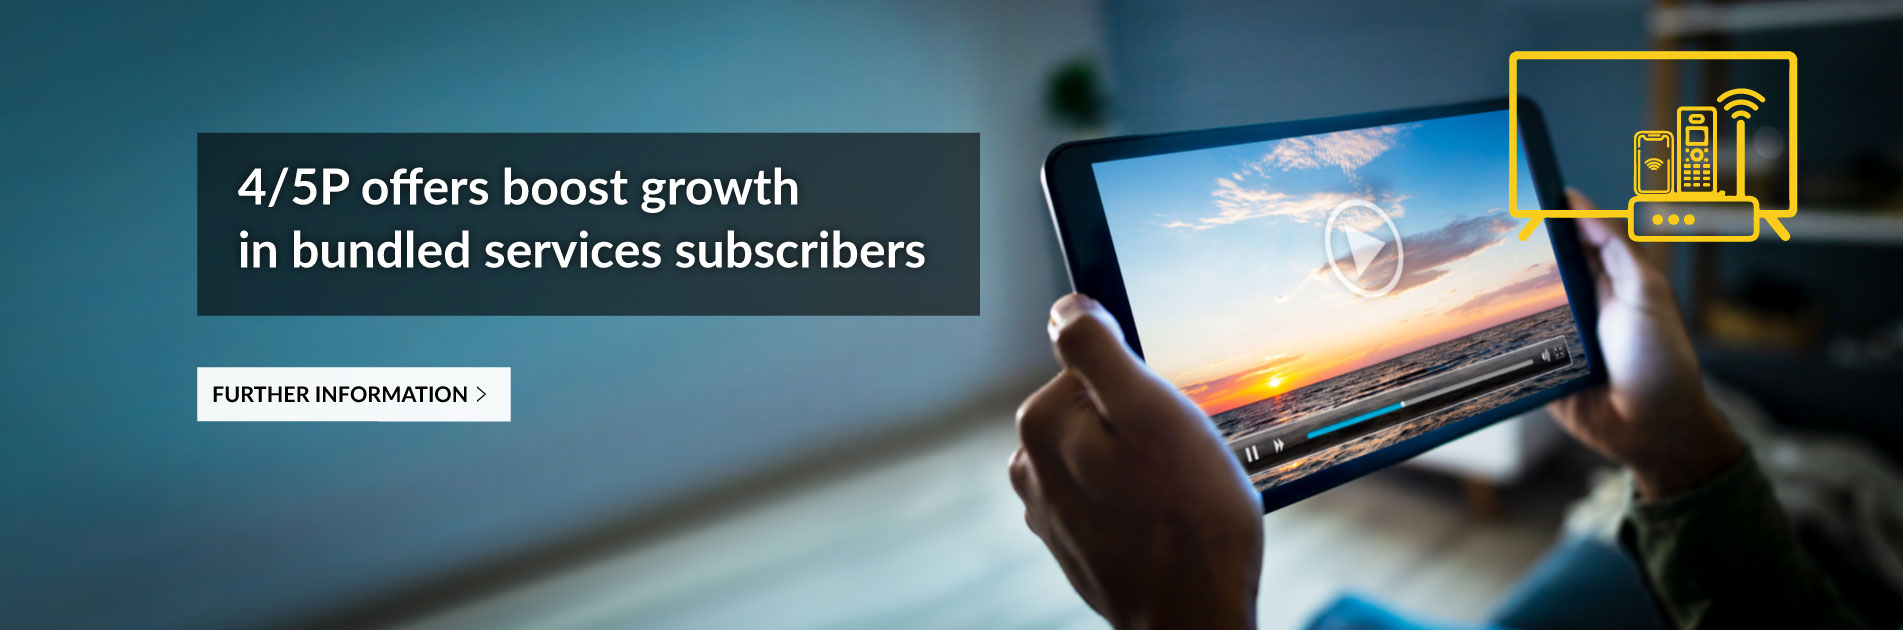 4/5P offers drive growth of subscribers to bundled services